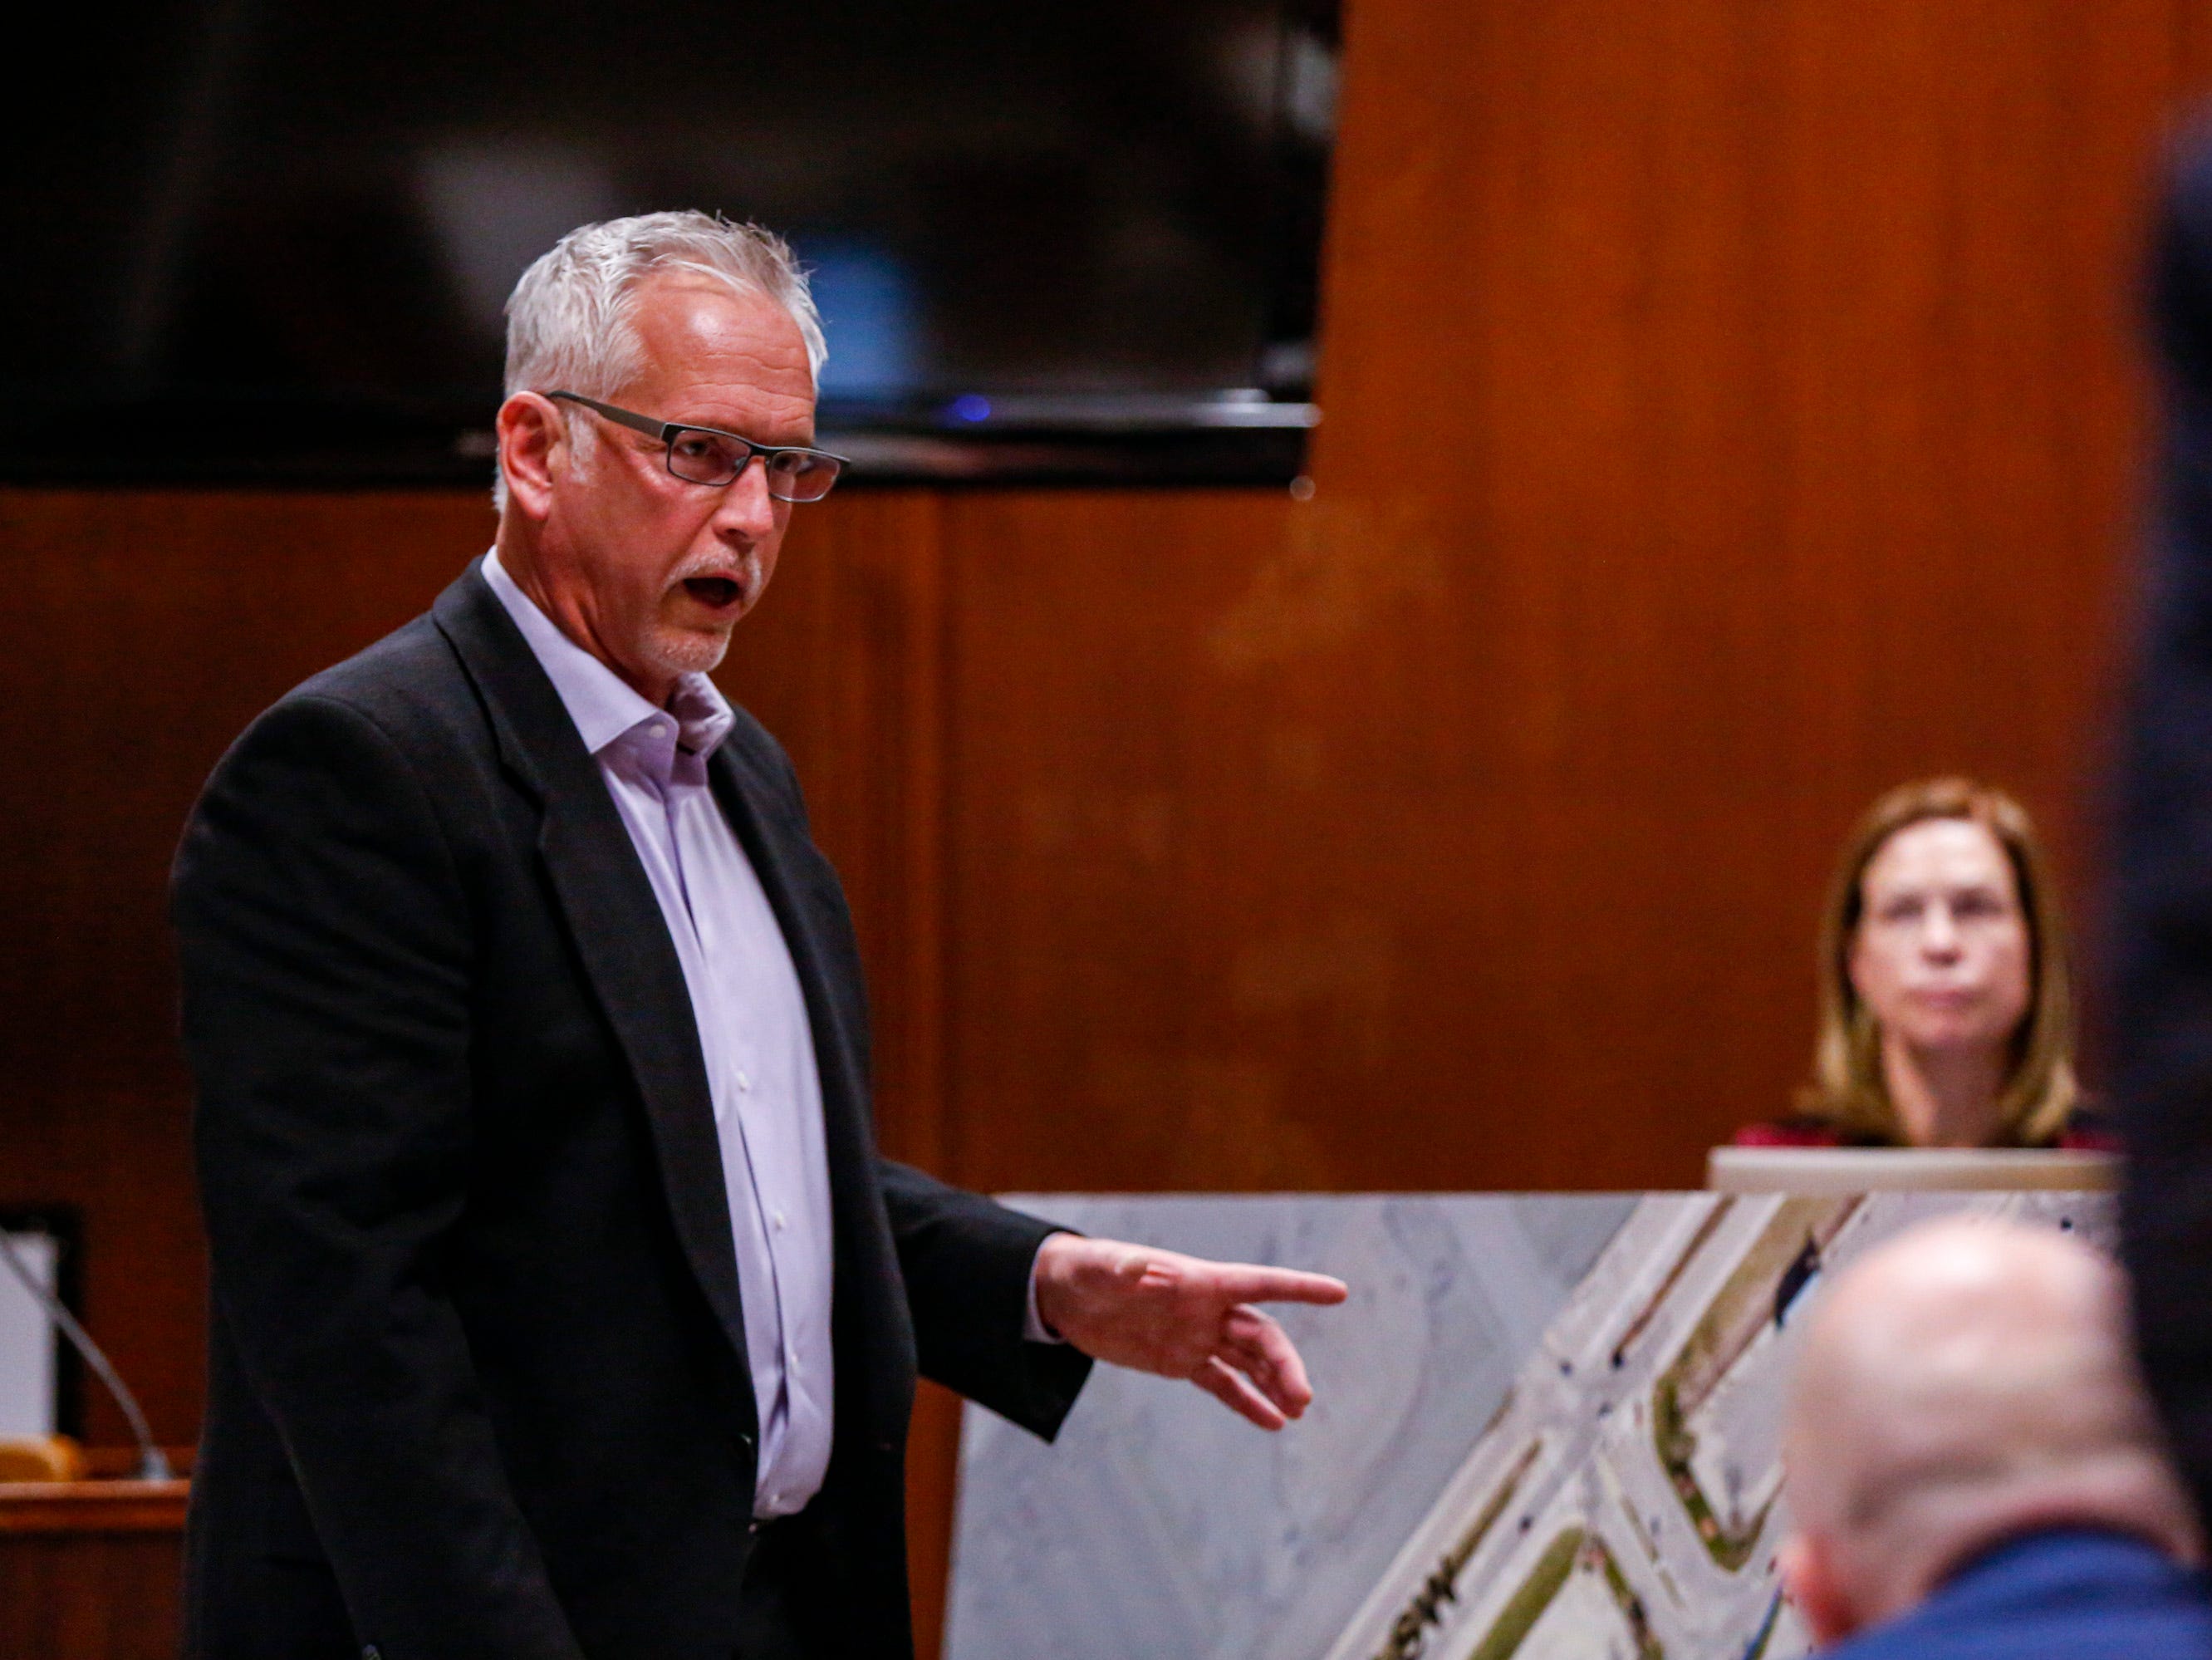 Jeffrey White, of Toddville, responds to questions while looking at a map of Westdale Mall in Cedar Rapids as it looked in 1979 during the trial of Jerry Burns at the Scott County Courthouse in Davenport on Wednesday, Feb. 12, 2020. White was at a choir banquet with Michelle Martinko the night she was killed.